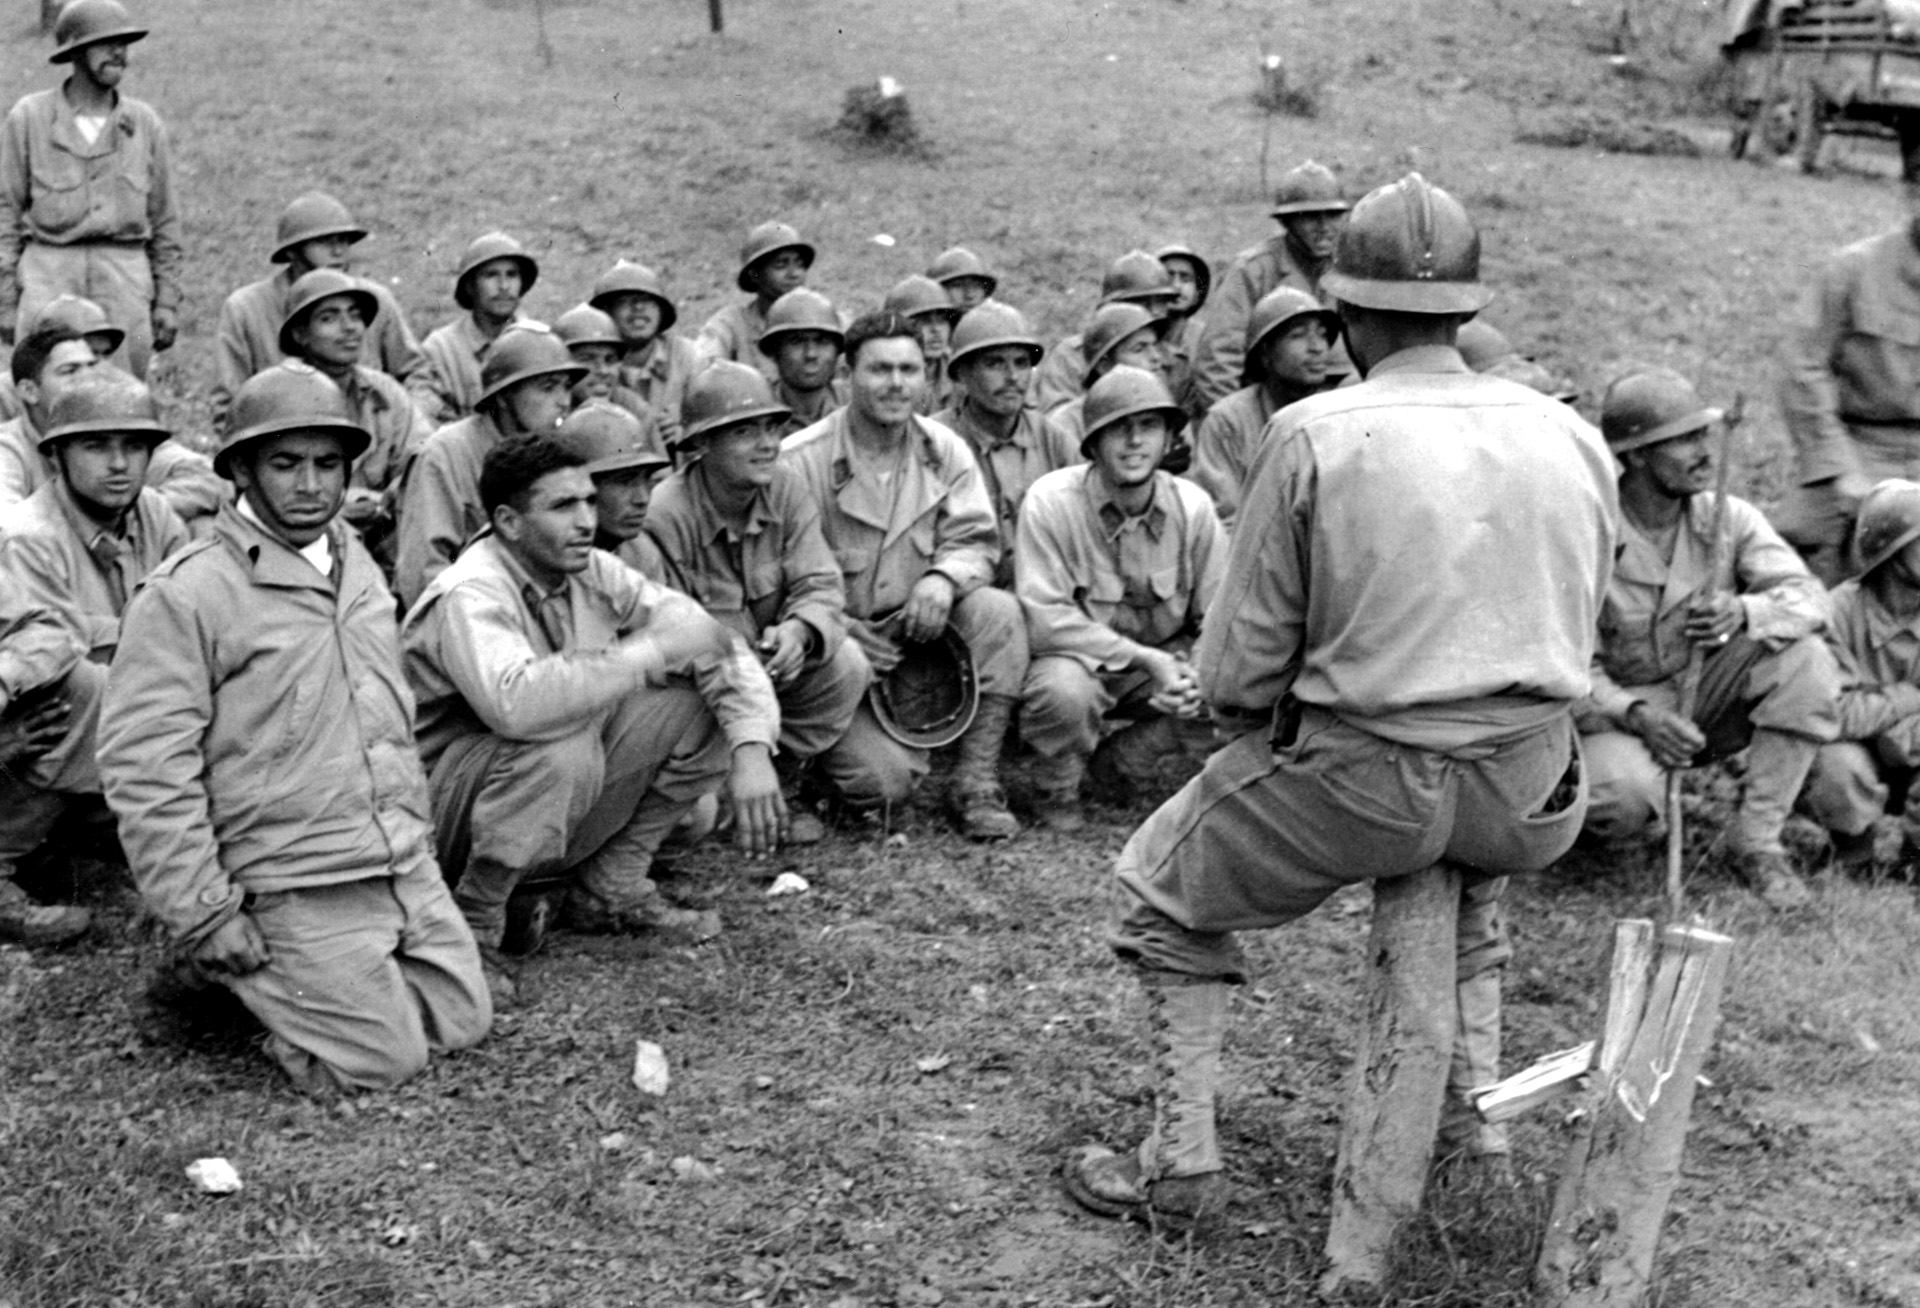 Goumiers, fierce fighters of the 2nd French Moroccan Division, receive a final briefing on German troop dispositions prior to relieving the U.S. 34th Infantry Division on the front line near Cassino in December 1943.